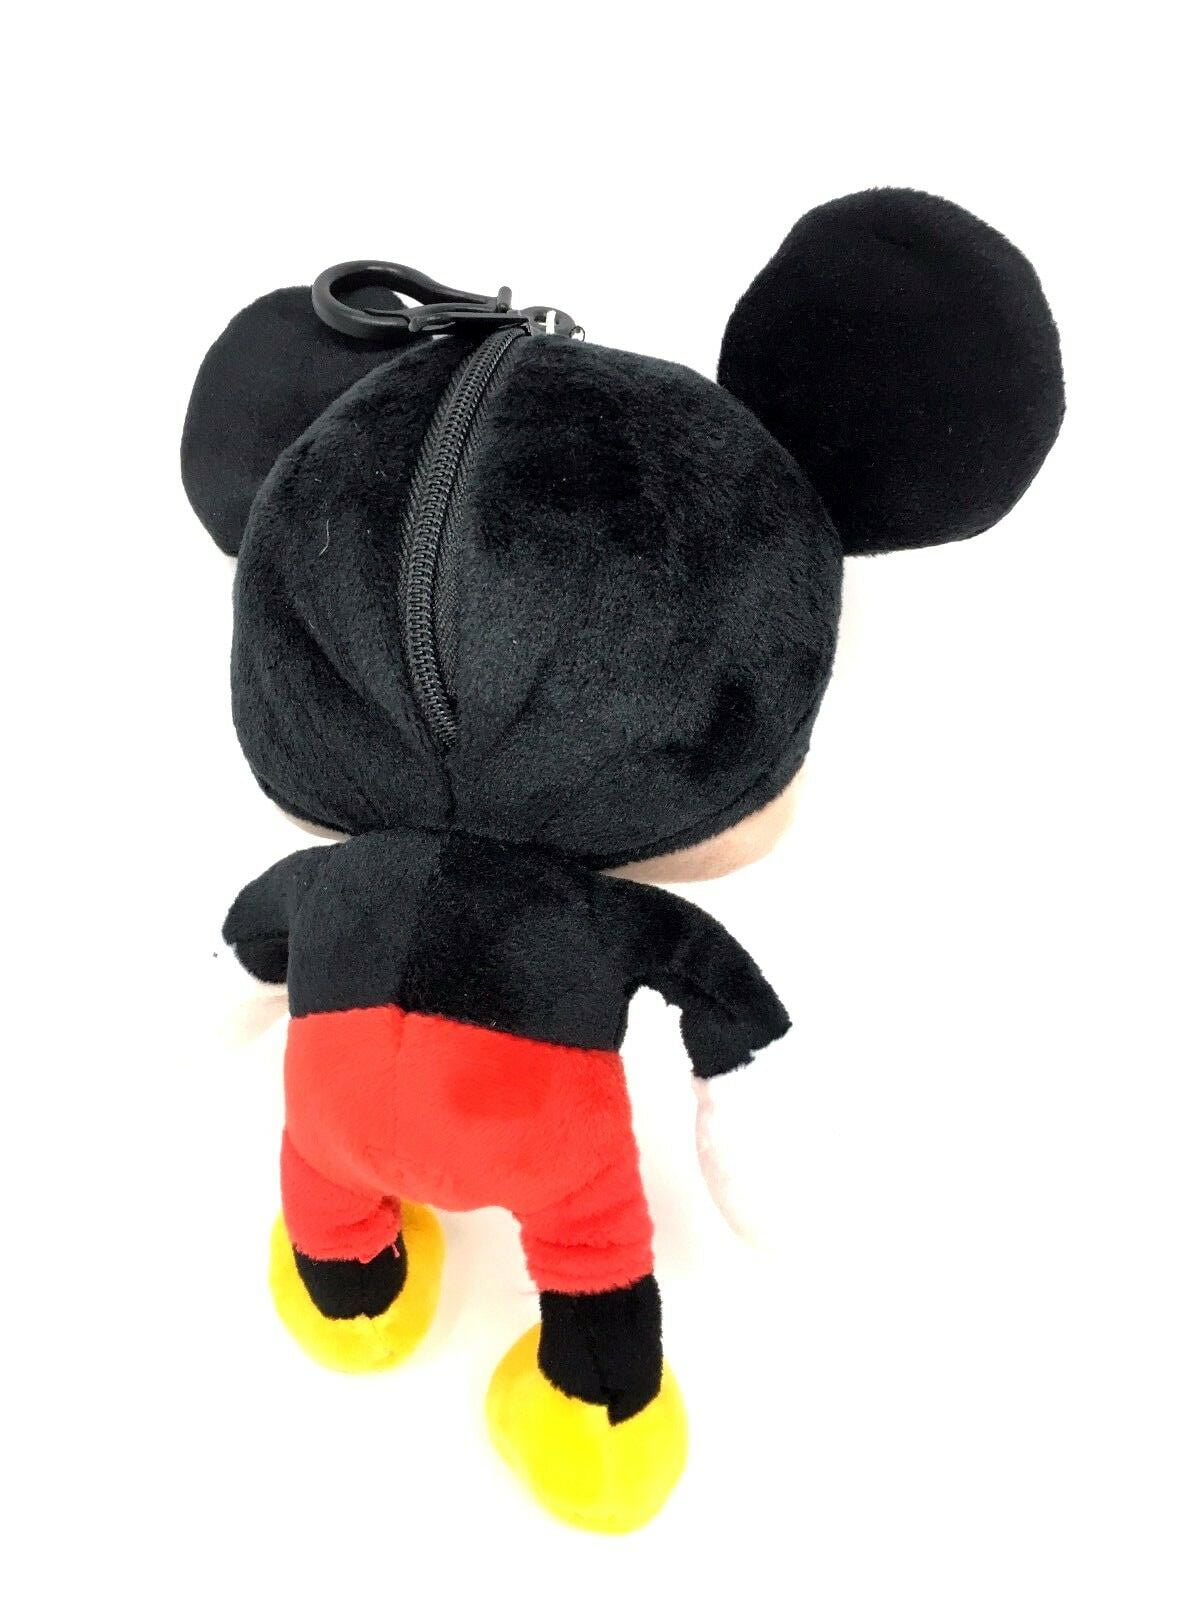 Disney Genuine Keychain Mickey Mouse Hand Glove keychain Cute Plush Pink  And Red